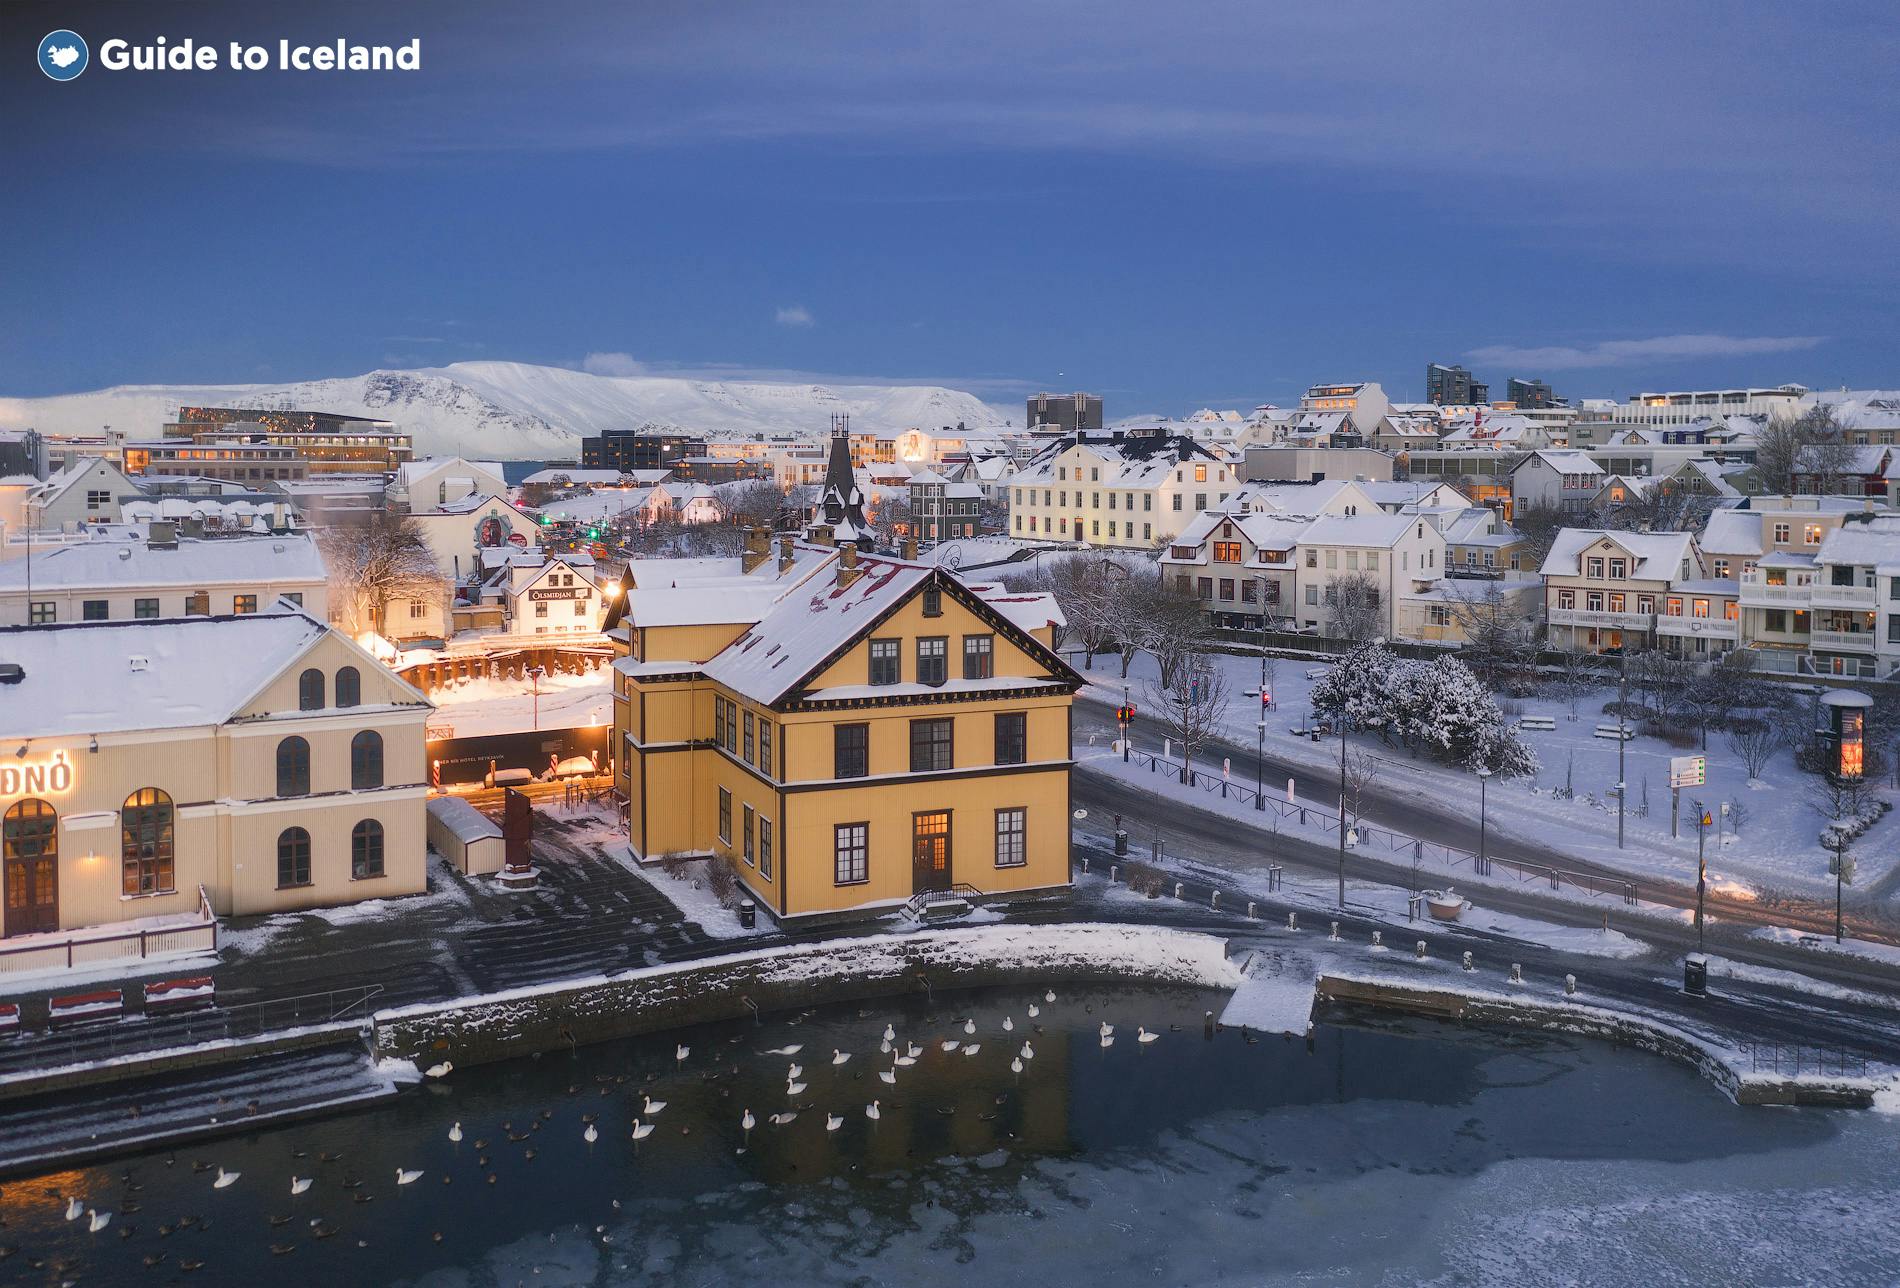 The city of Reykjavik blanketed in snow in wintertime